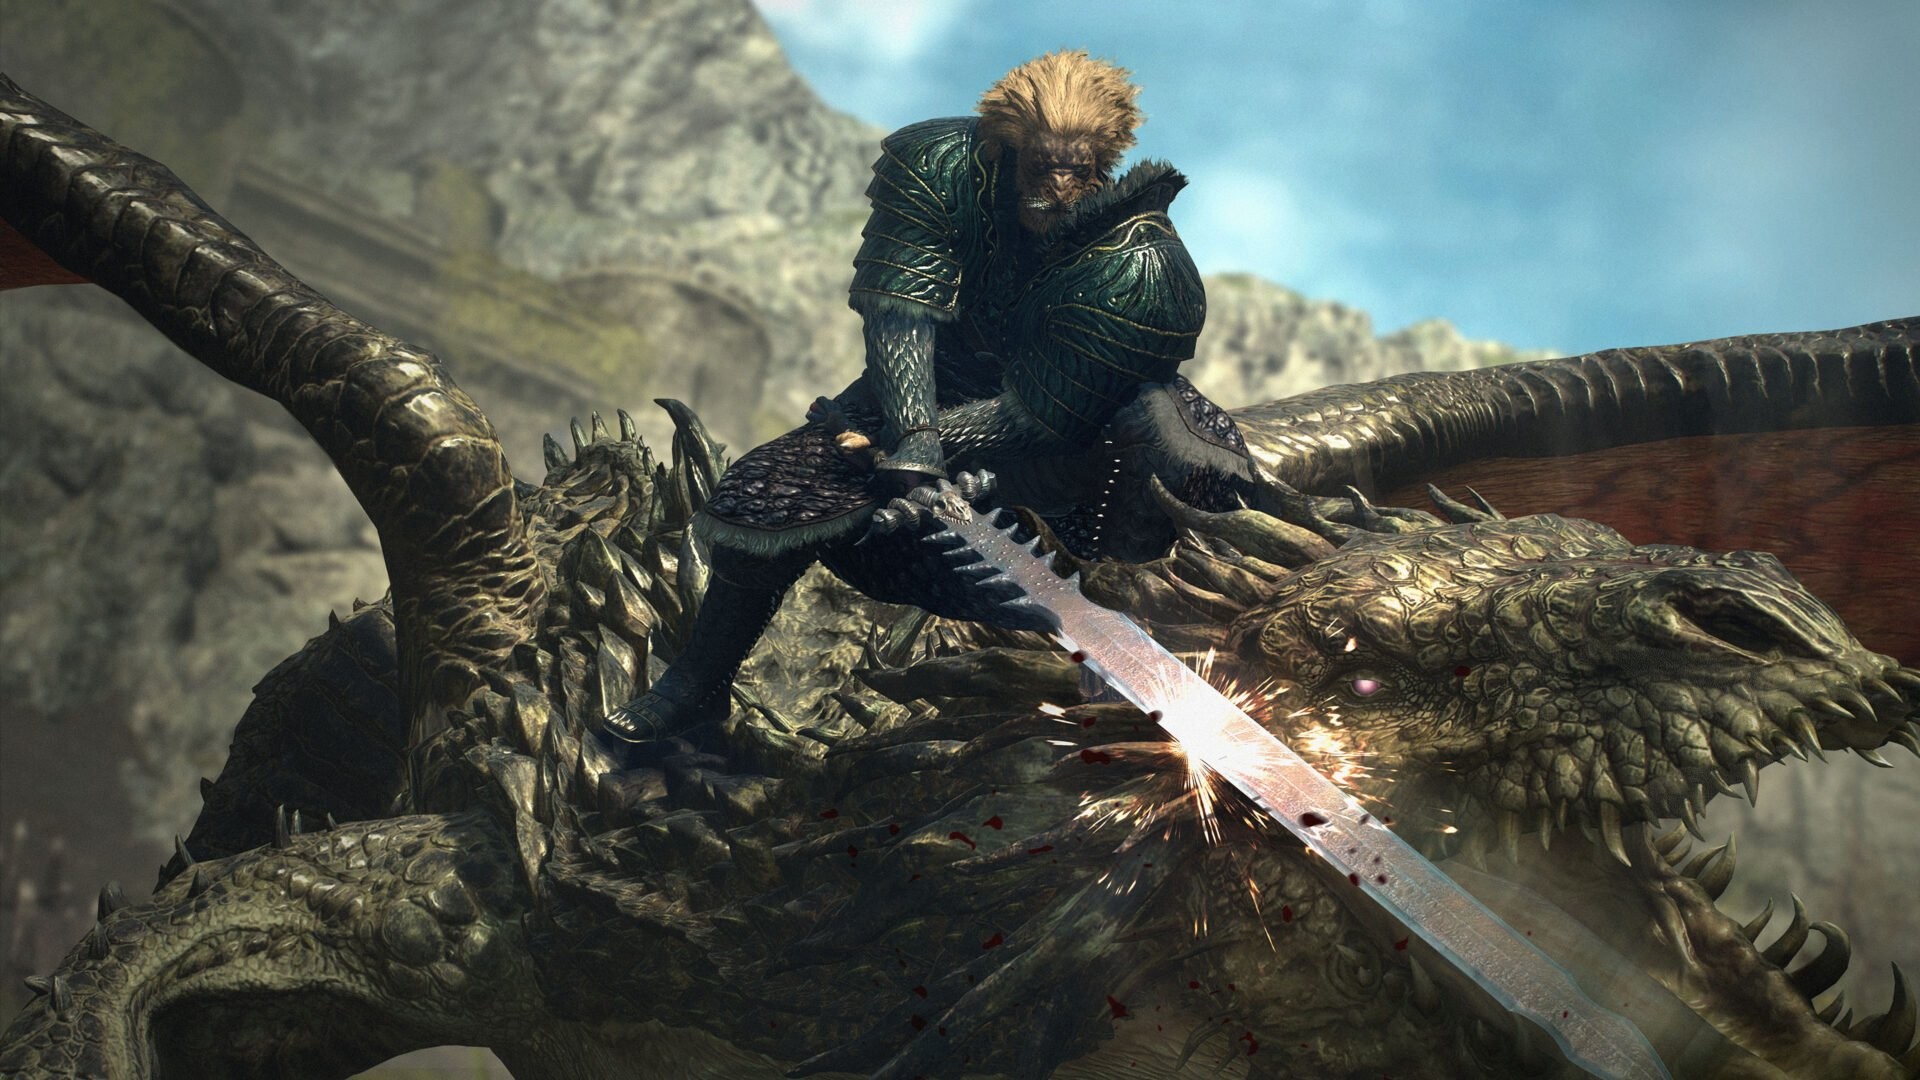 Dragon's Dogma 2 release date leaks again, on Steam right before the RPG's  showcase